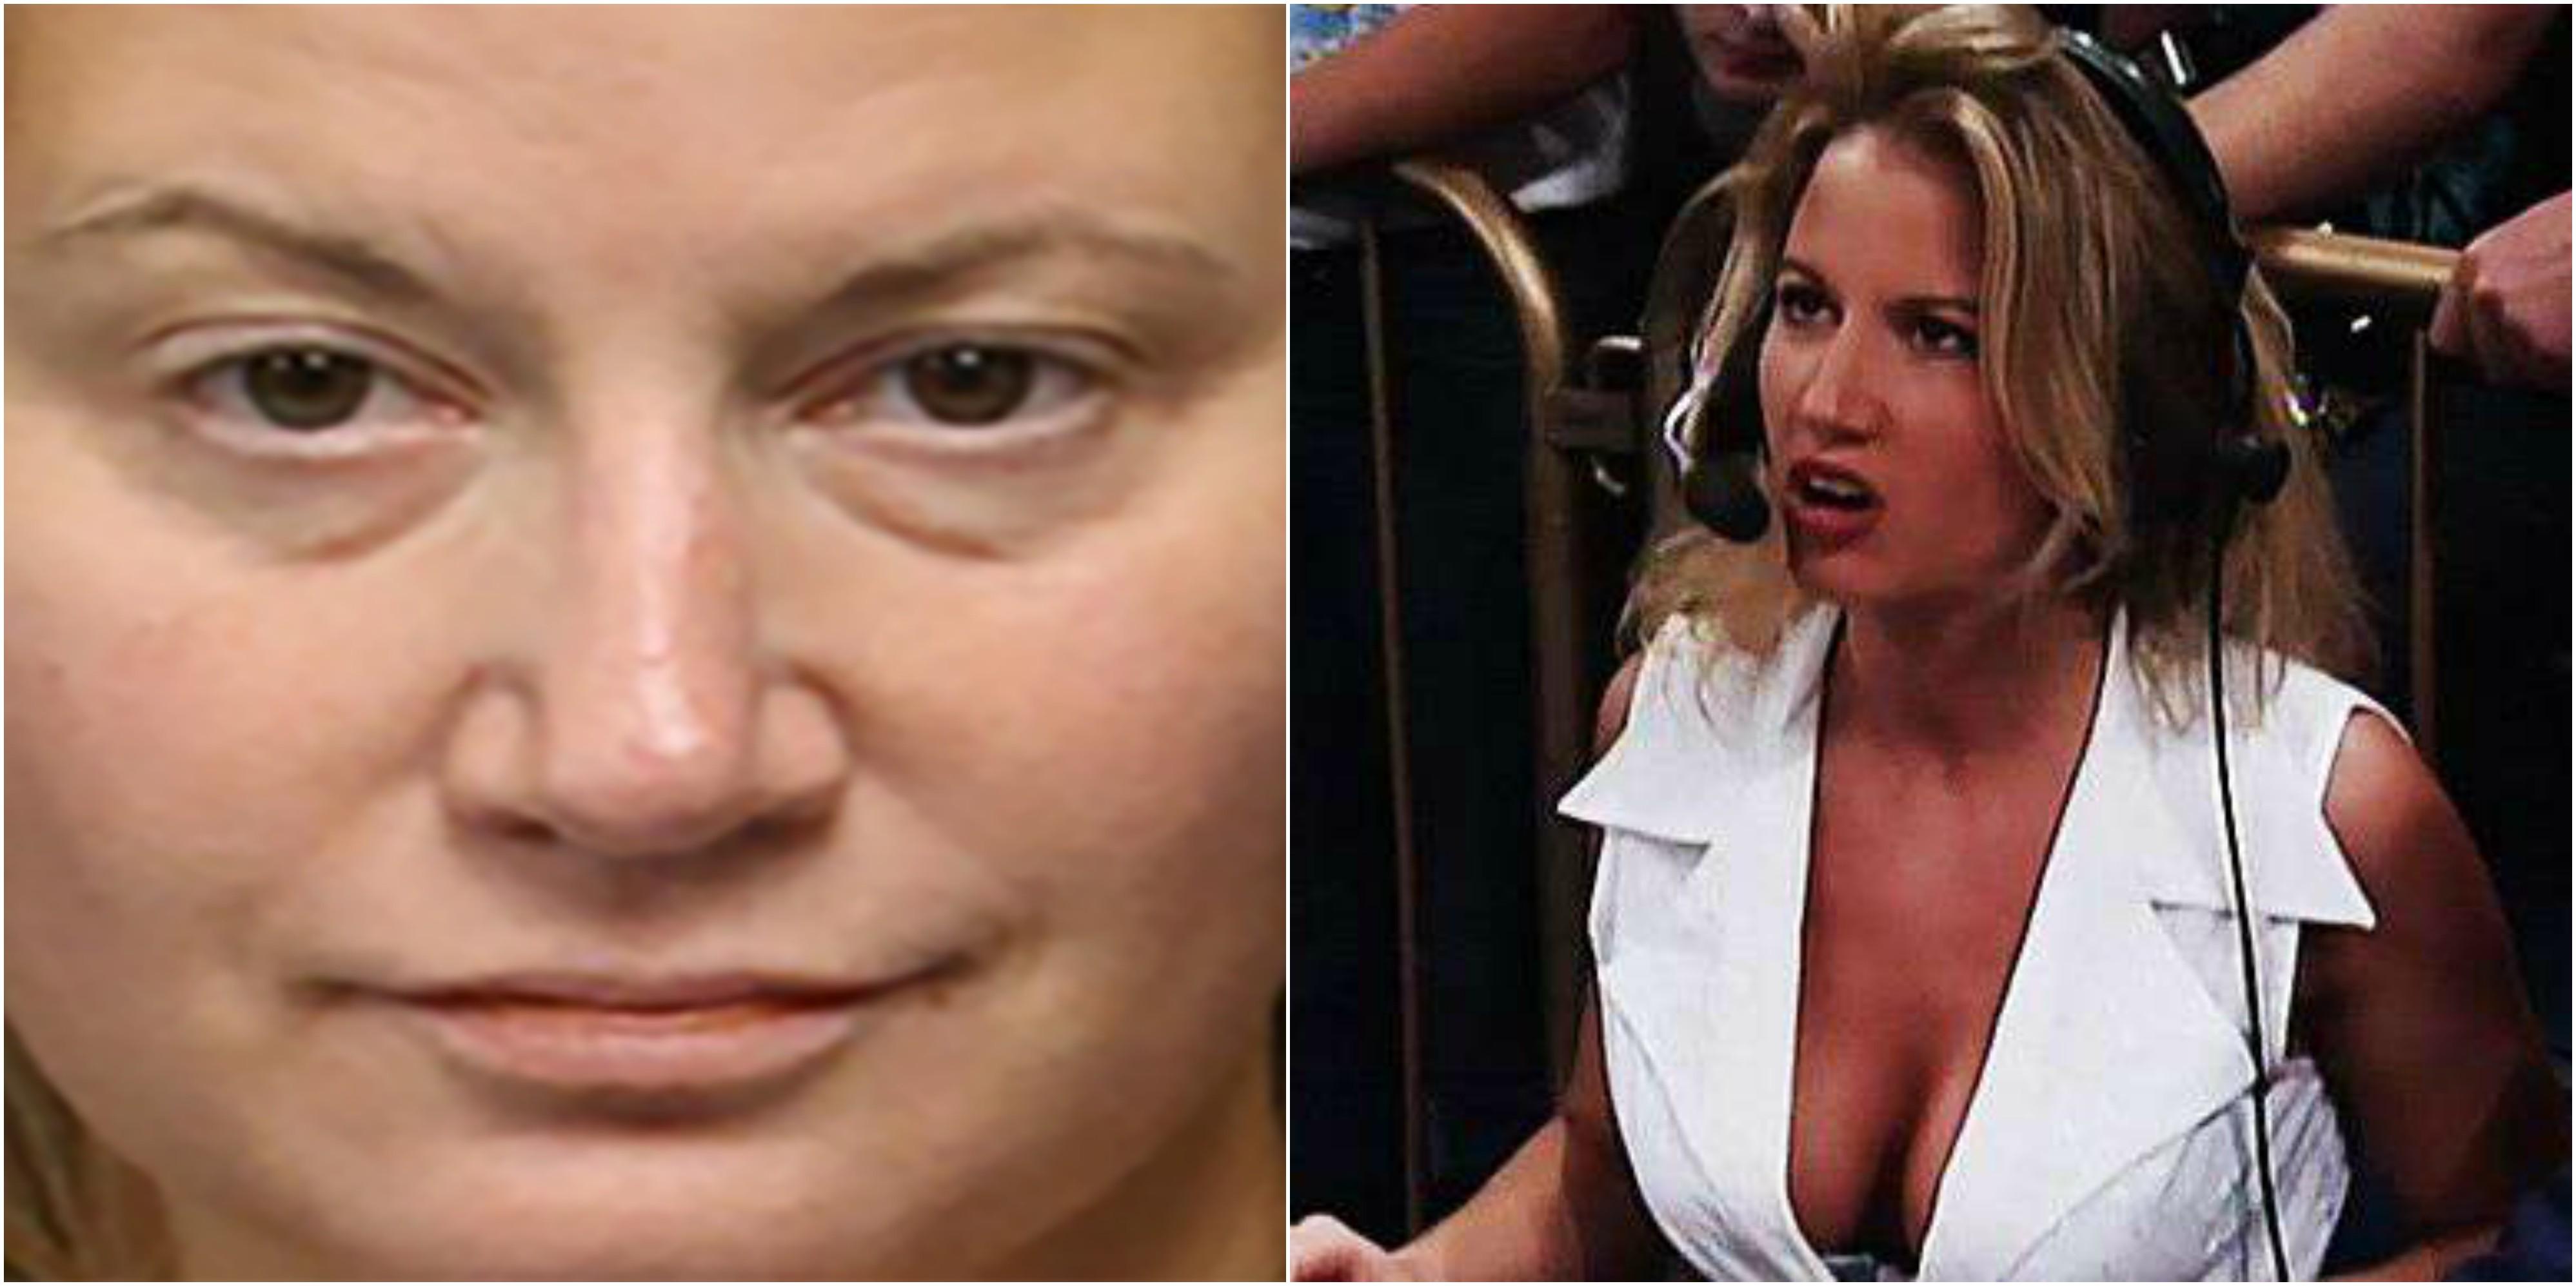 Wwe Hall Of Famer Turned Porn Star Tammy Sunny Sytch Jailed After Th